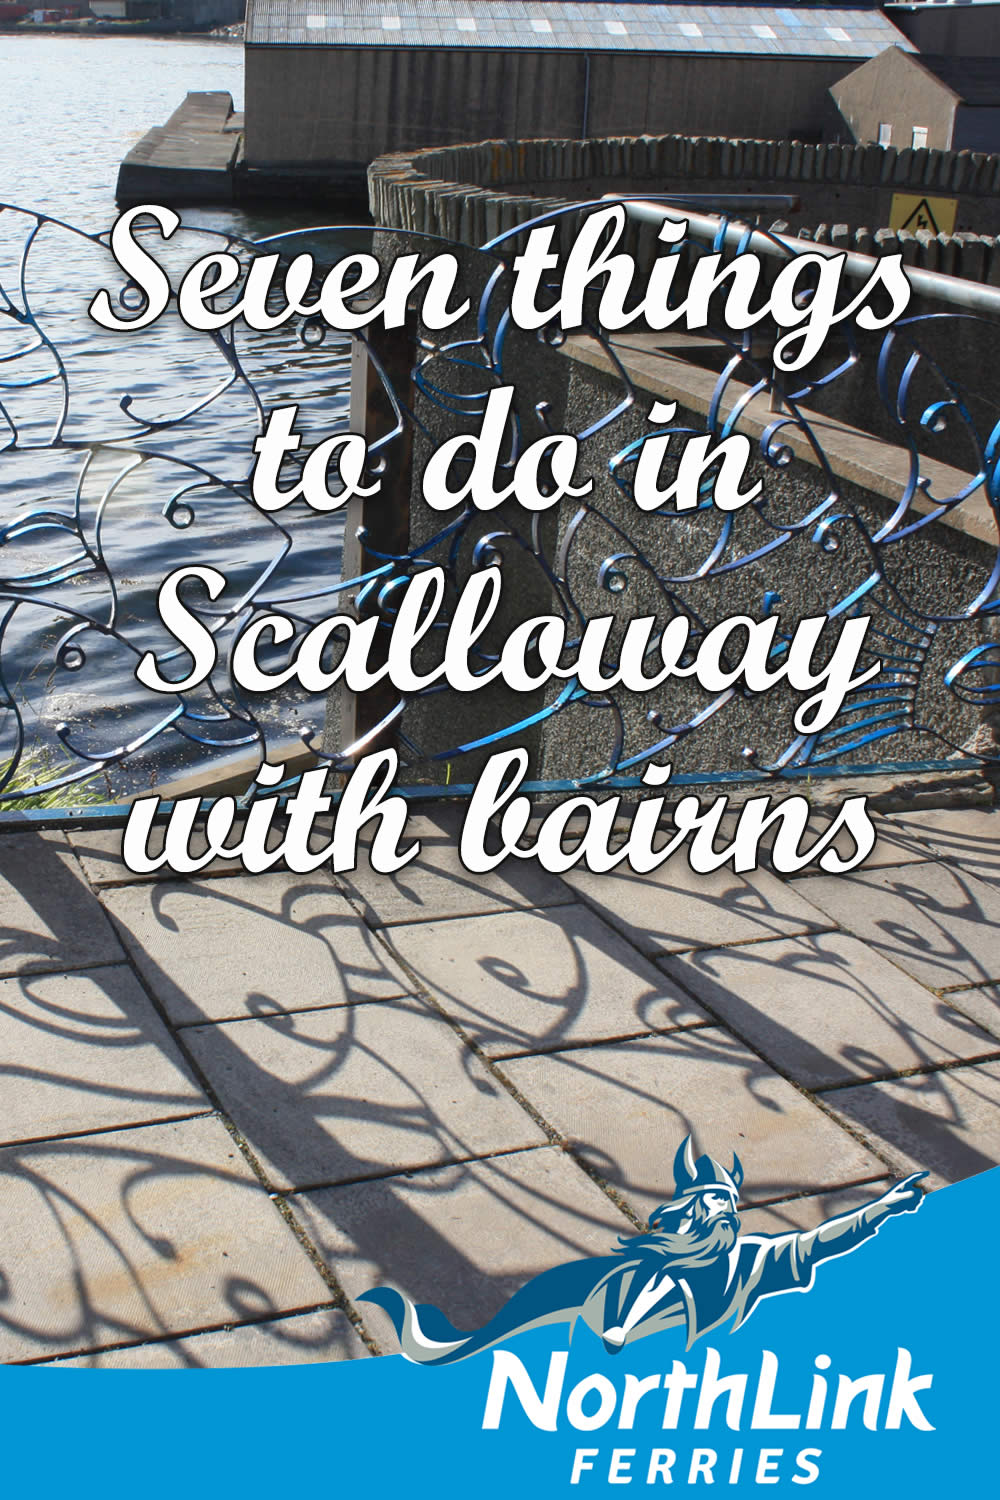 Seven things to do in Scalloway with bairns